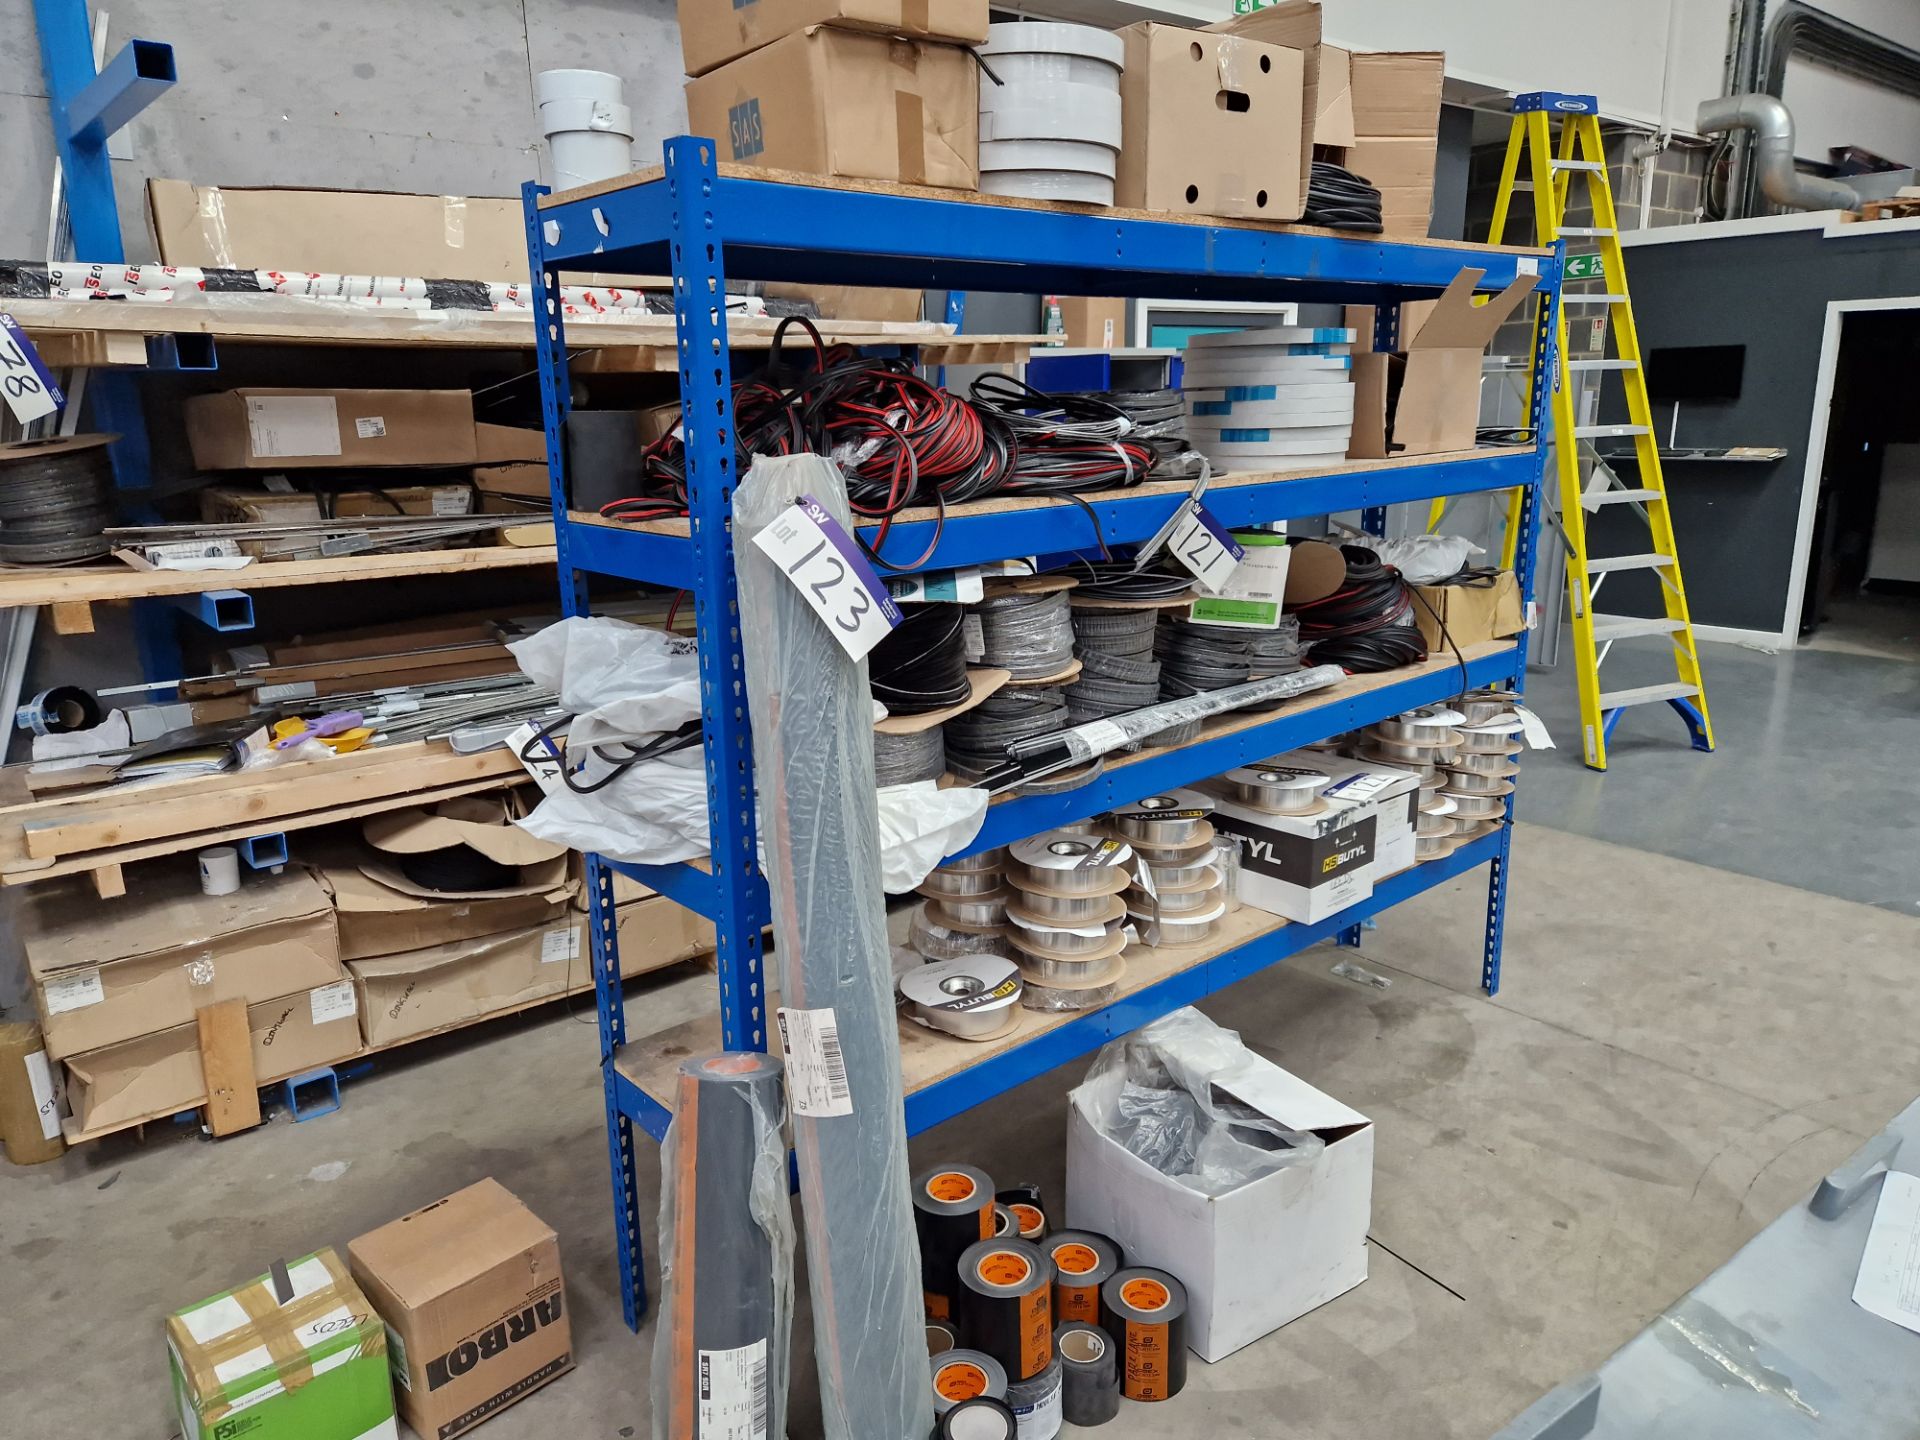 Four Bays of 4 Tier Boltless Steel Shelving, Approx. 2.5m x 0.5m x 2m (Reserve Removal until - Image 2 of 2